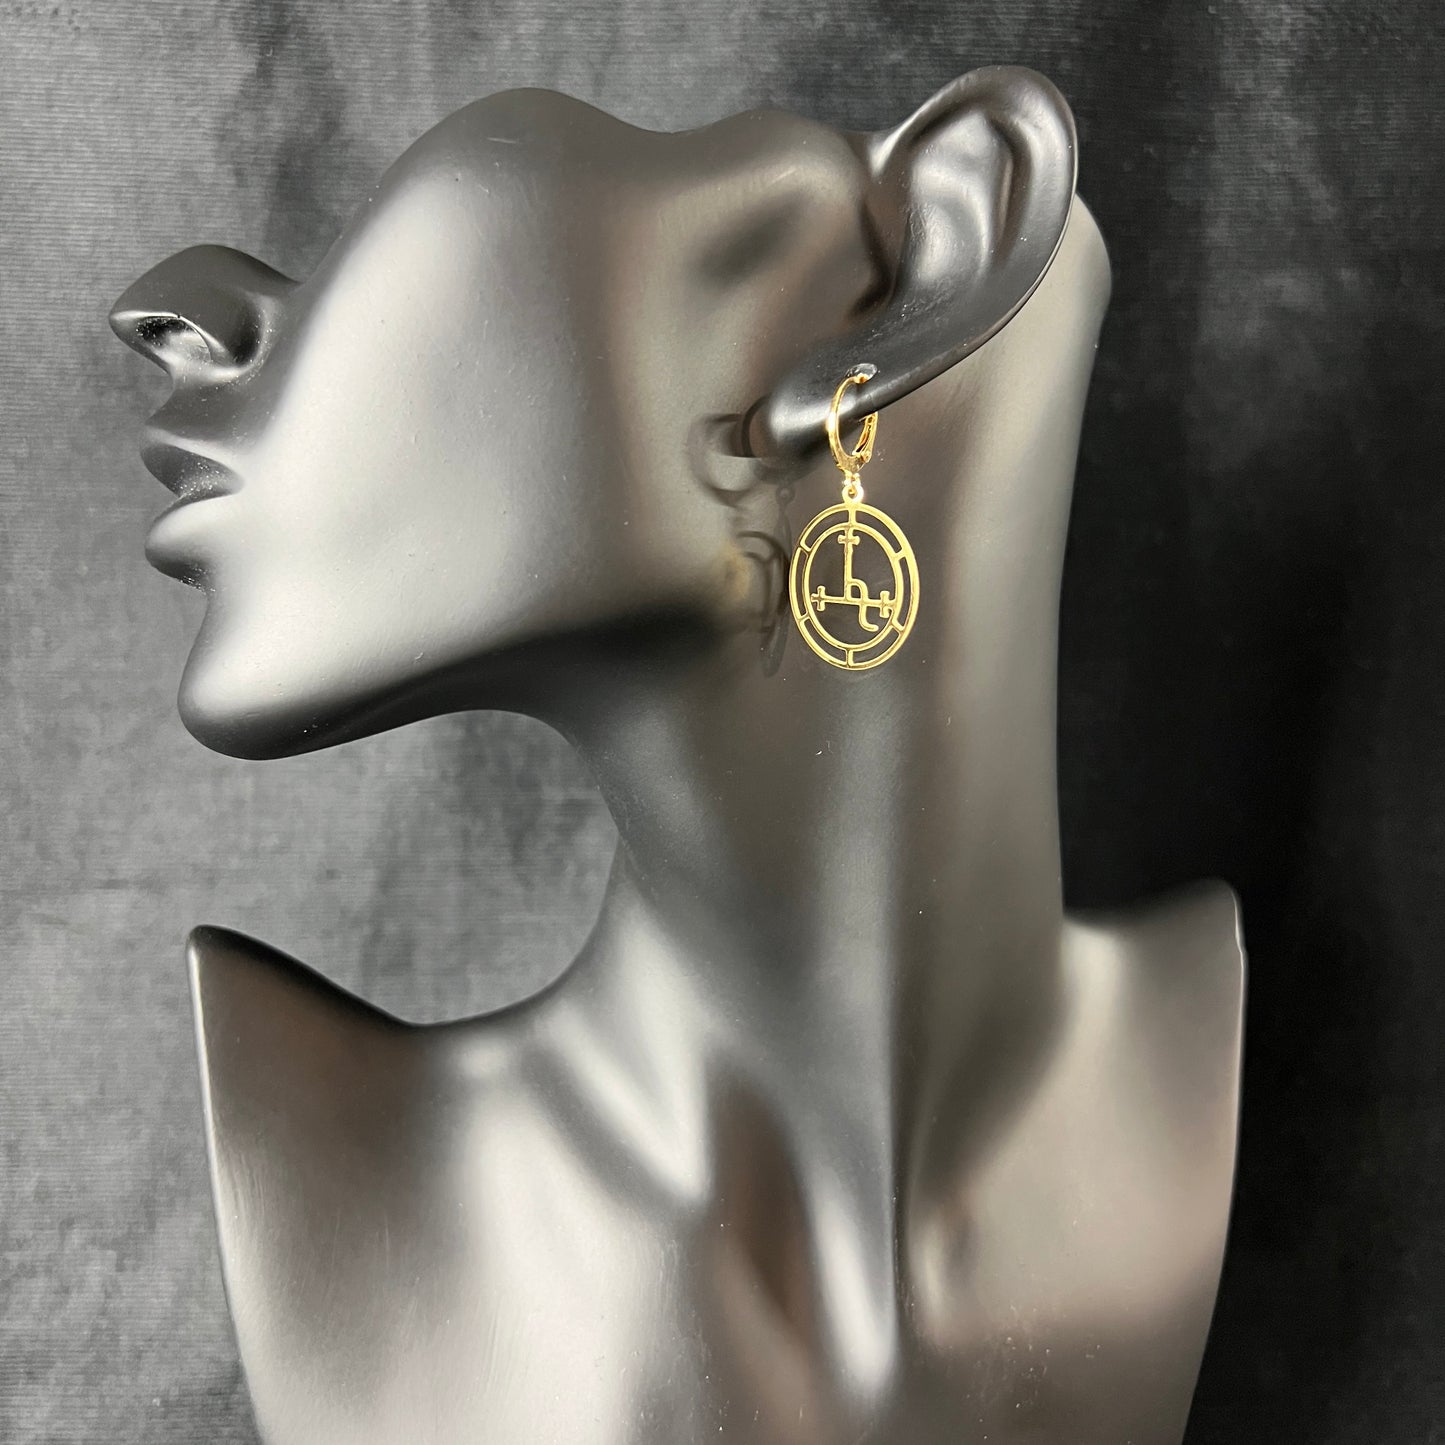 Lilith sigil earrings gold or silver tone gothic occult jewellery hypoallergenic earrings seal of Lilith feminist symbol jewelry